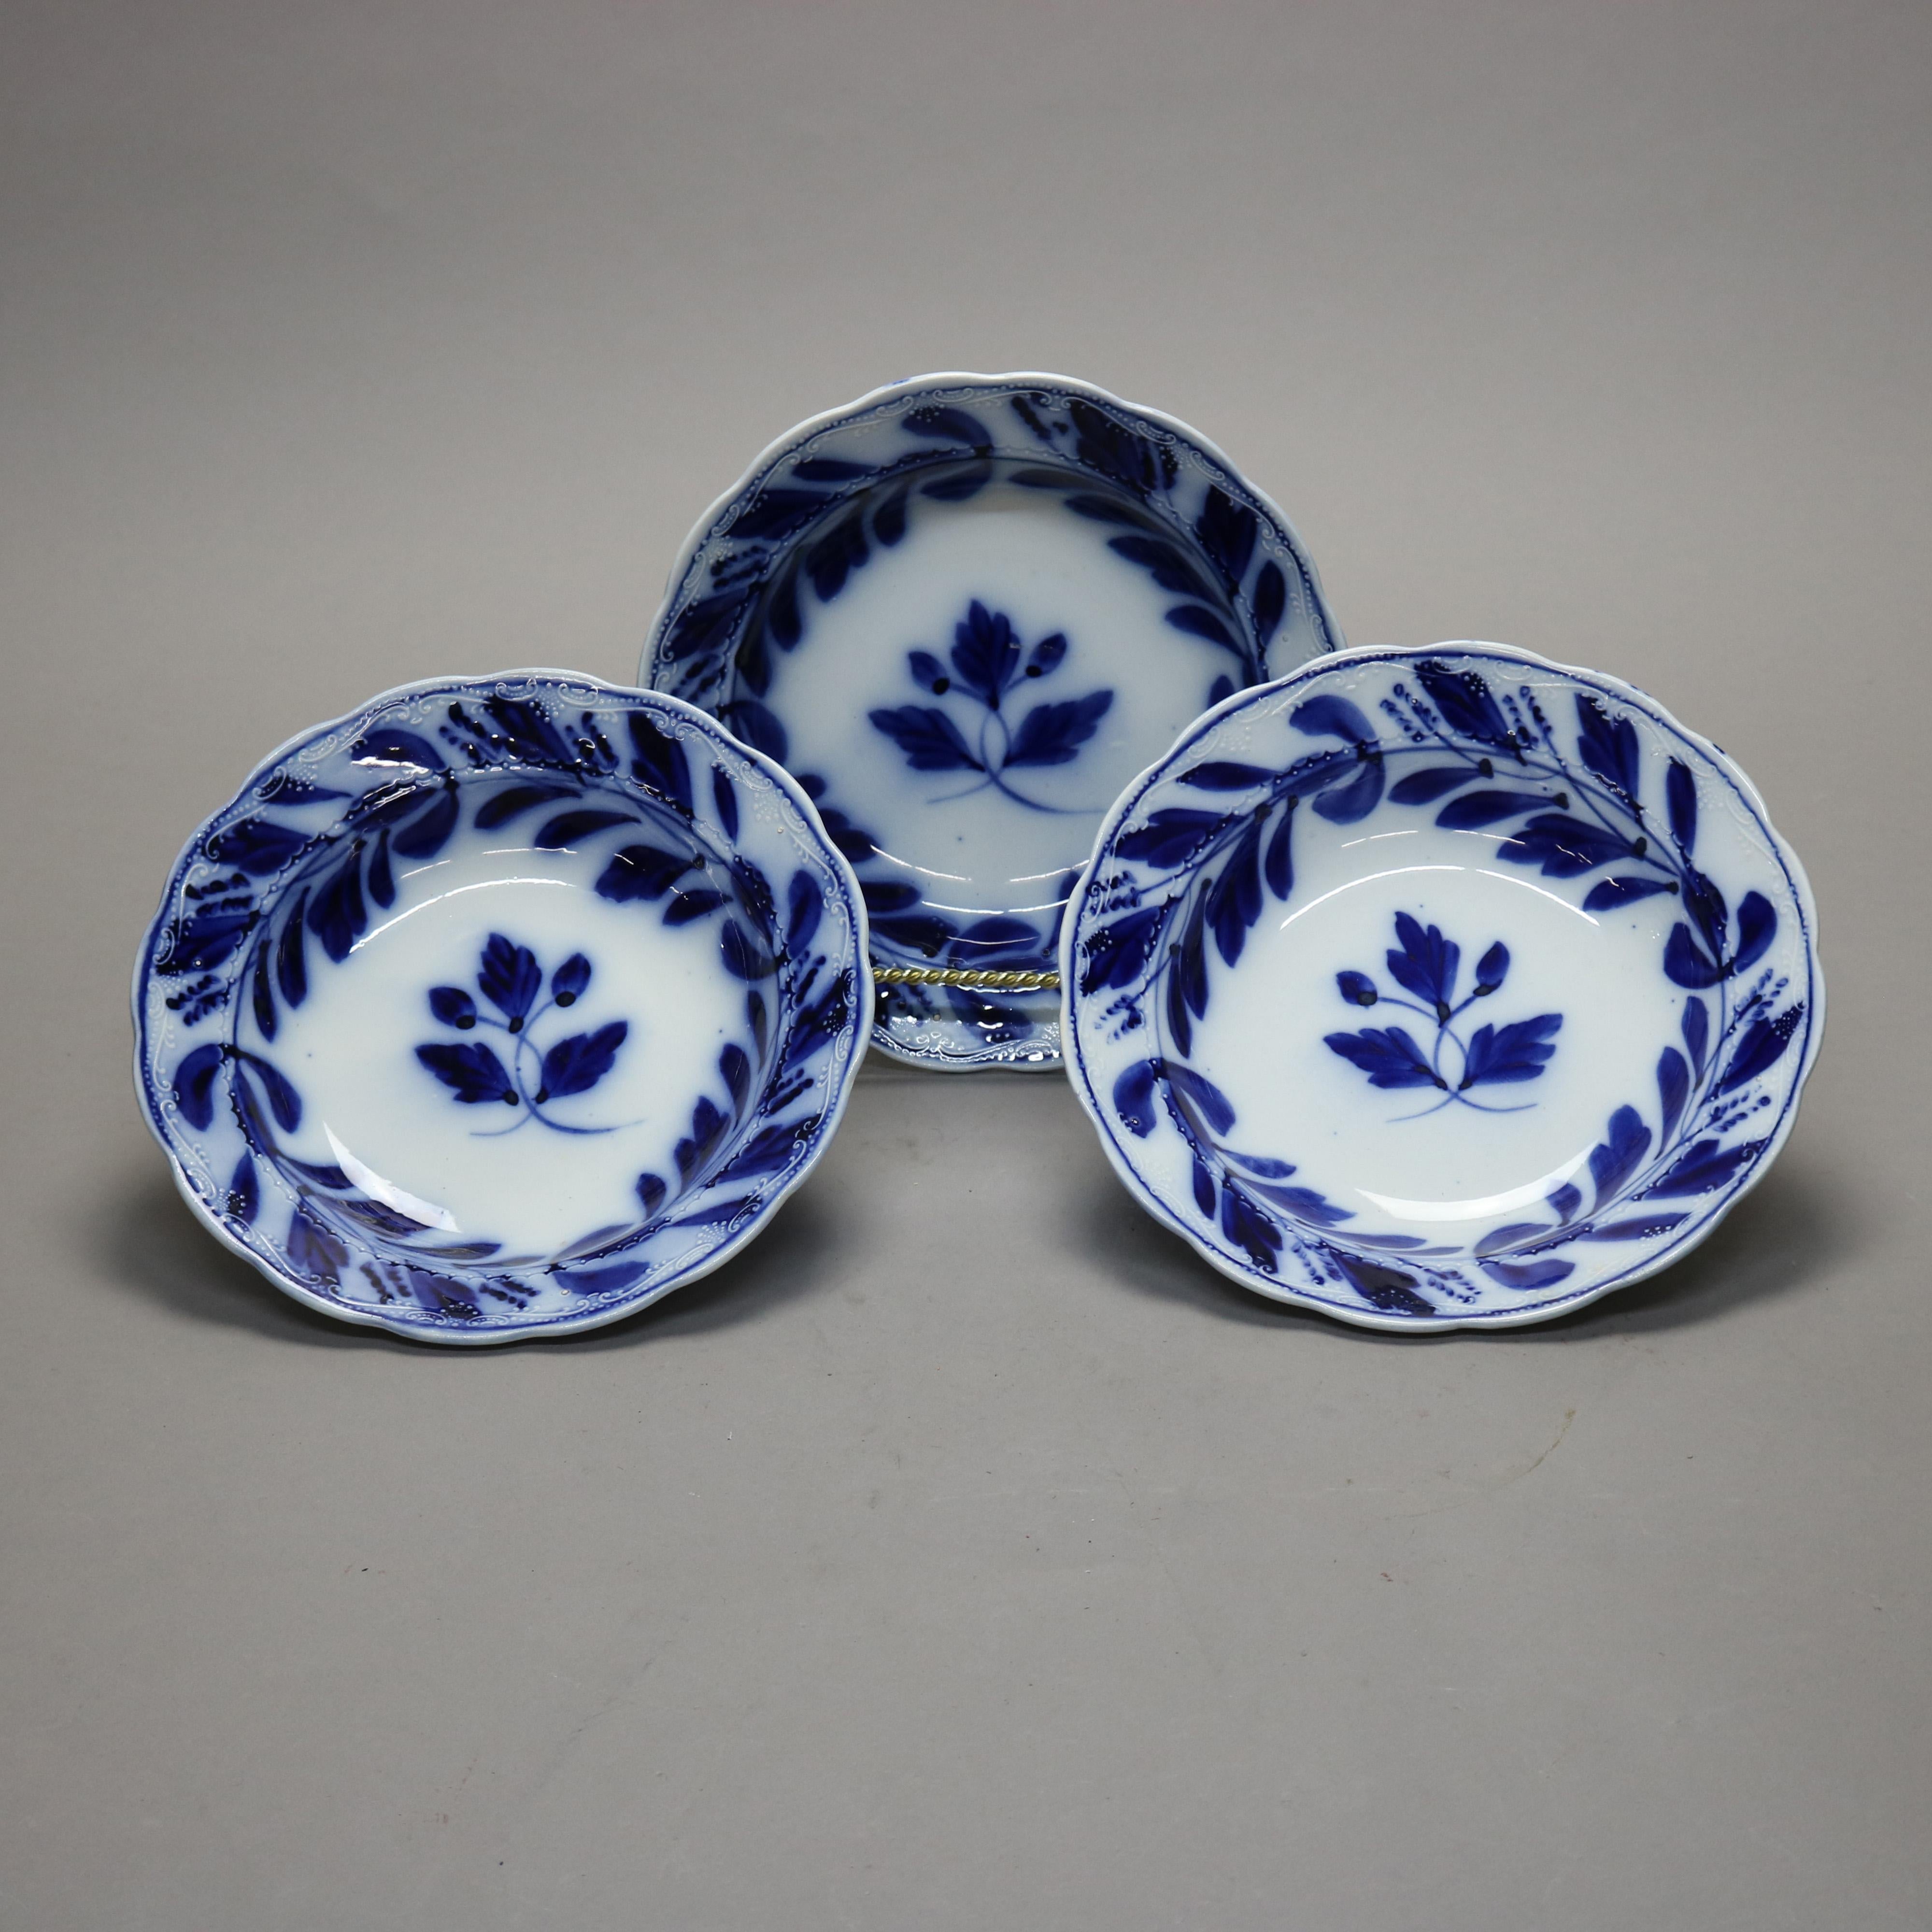 A set of three antique English Davenport bowls offer porcelain construction with well and rim having flow blue foliate decoration and scalloped rims, marked on bases as photographed, c1850.

Measures - 2''H x 9.5''W x 9.5''D.